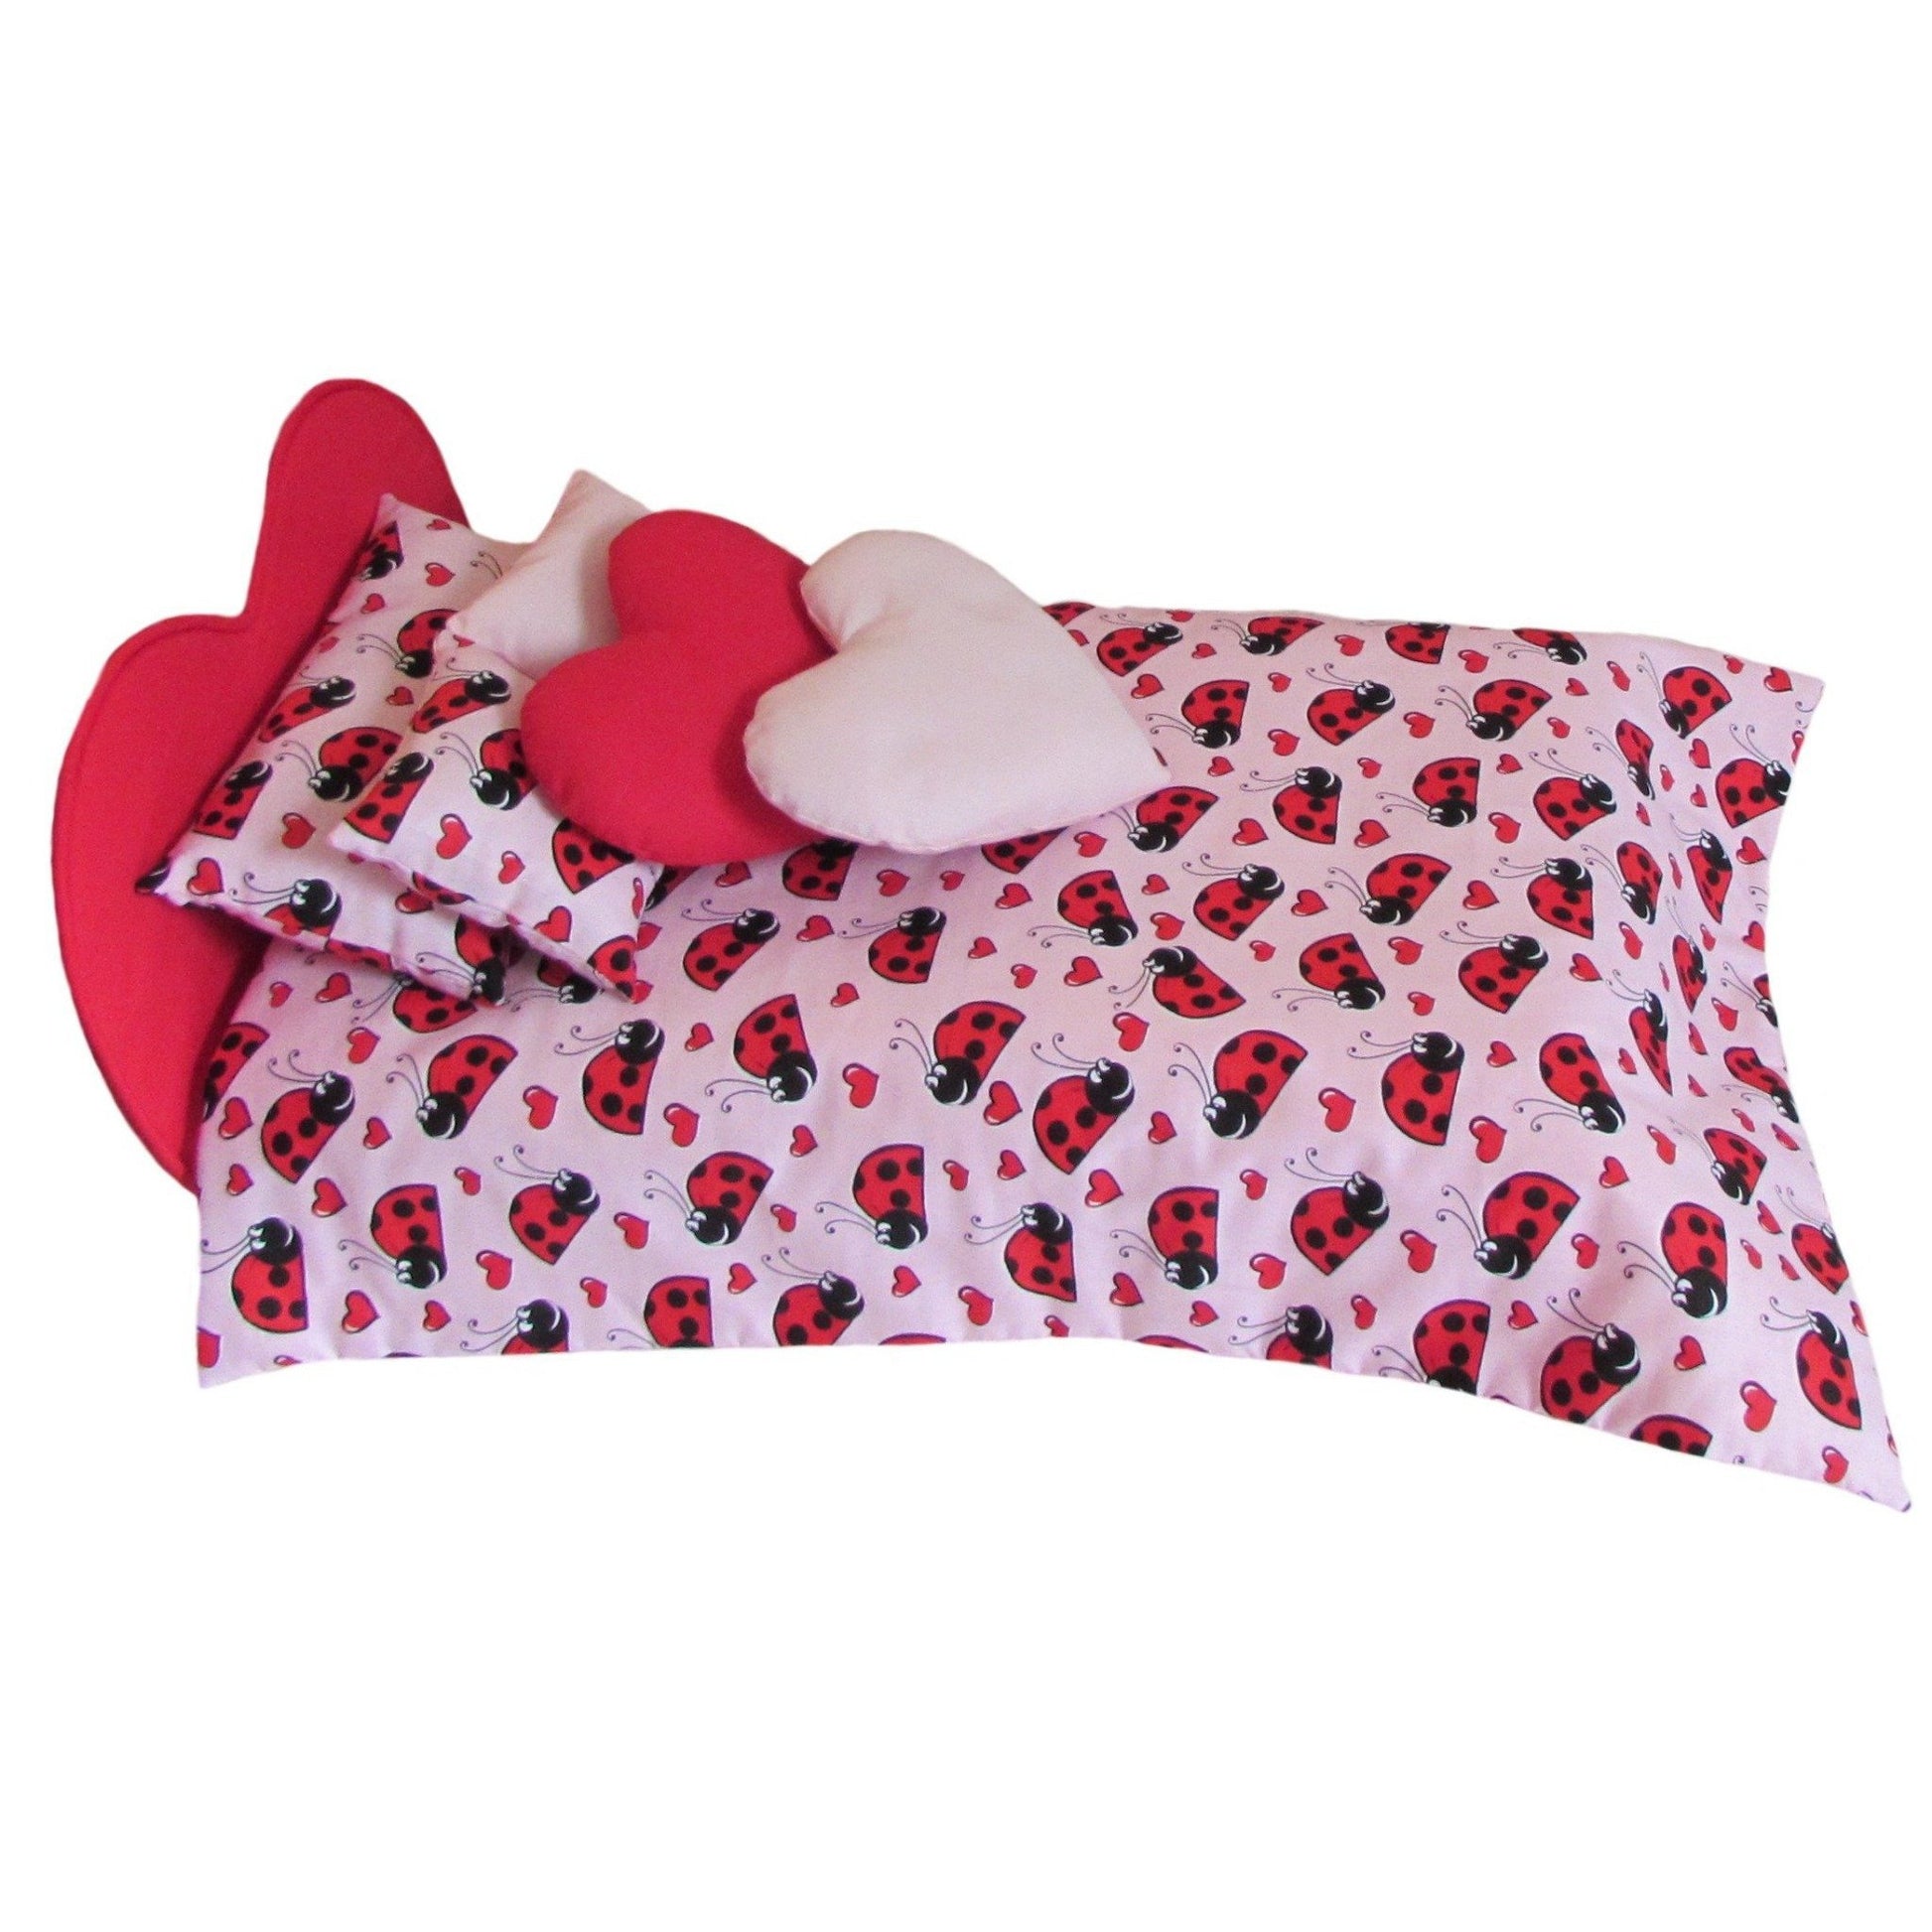 Pink Ladybug Hearts Doll Comforter Set and Red Heart Doll Bed for 18-inch dolls